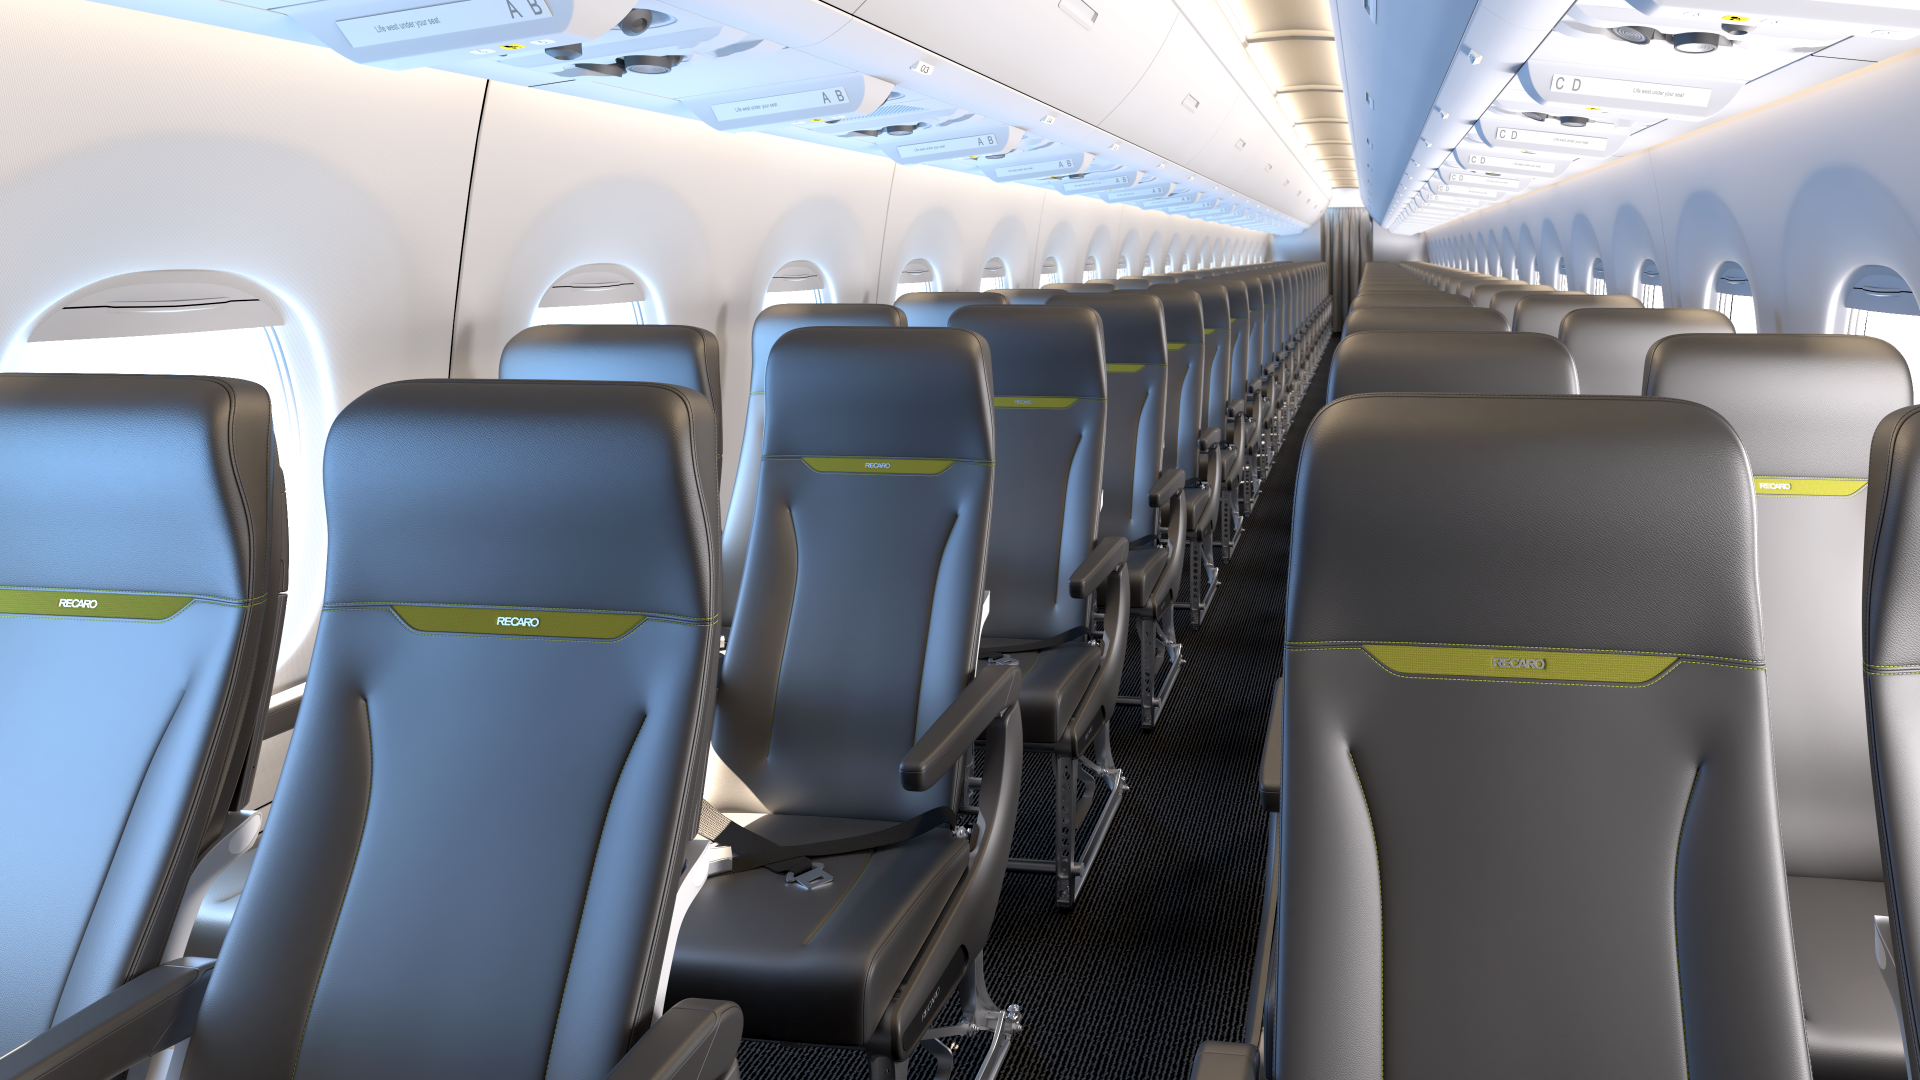 PAS 2023: Embraer and Recaro make SFE seating deal on its E1 and E2